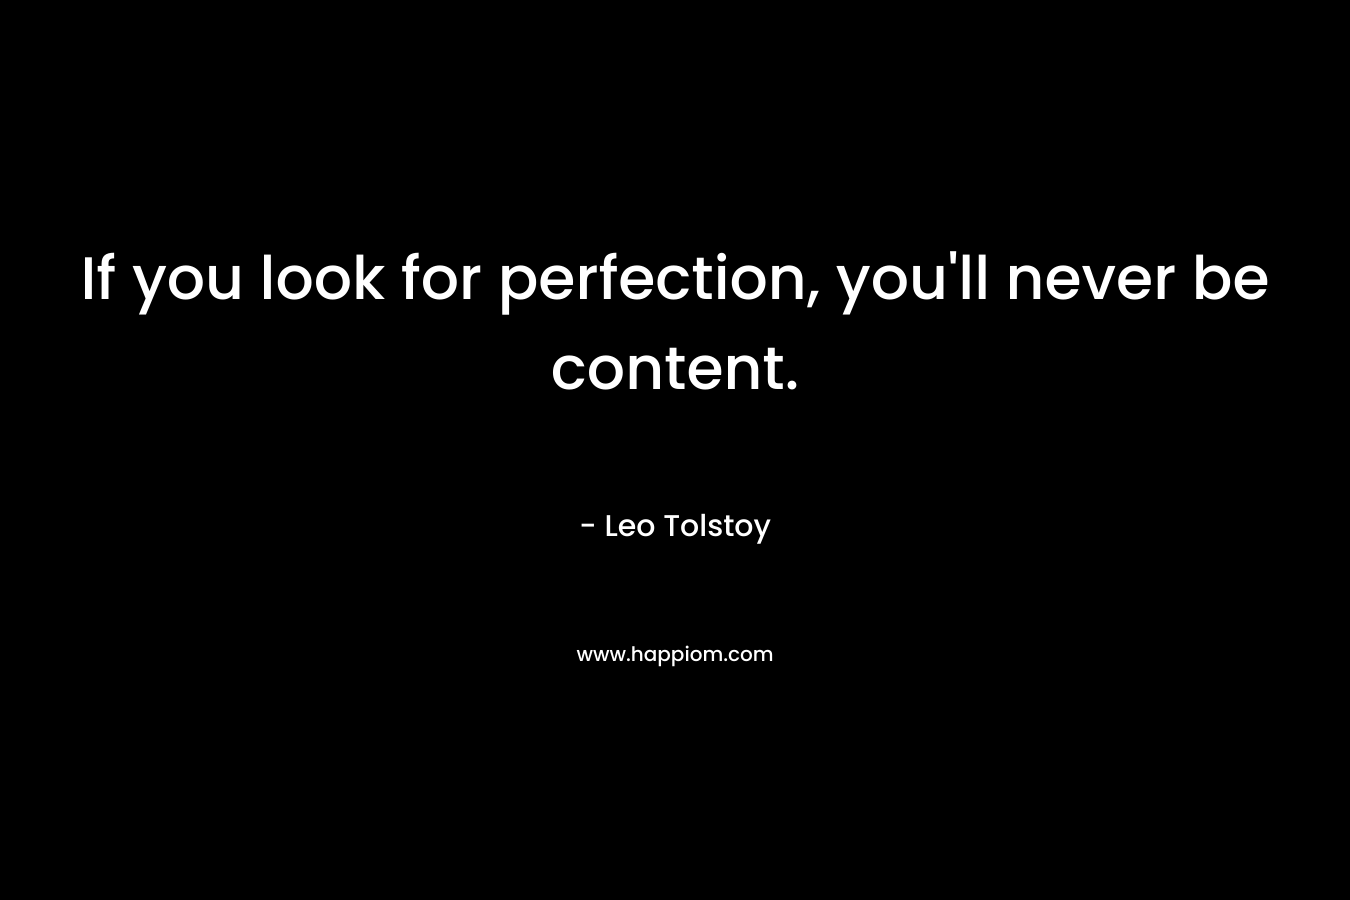 If you look for perfection, you'll never be content.